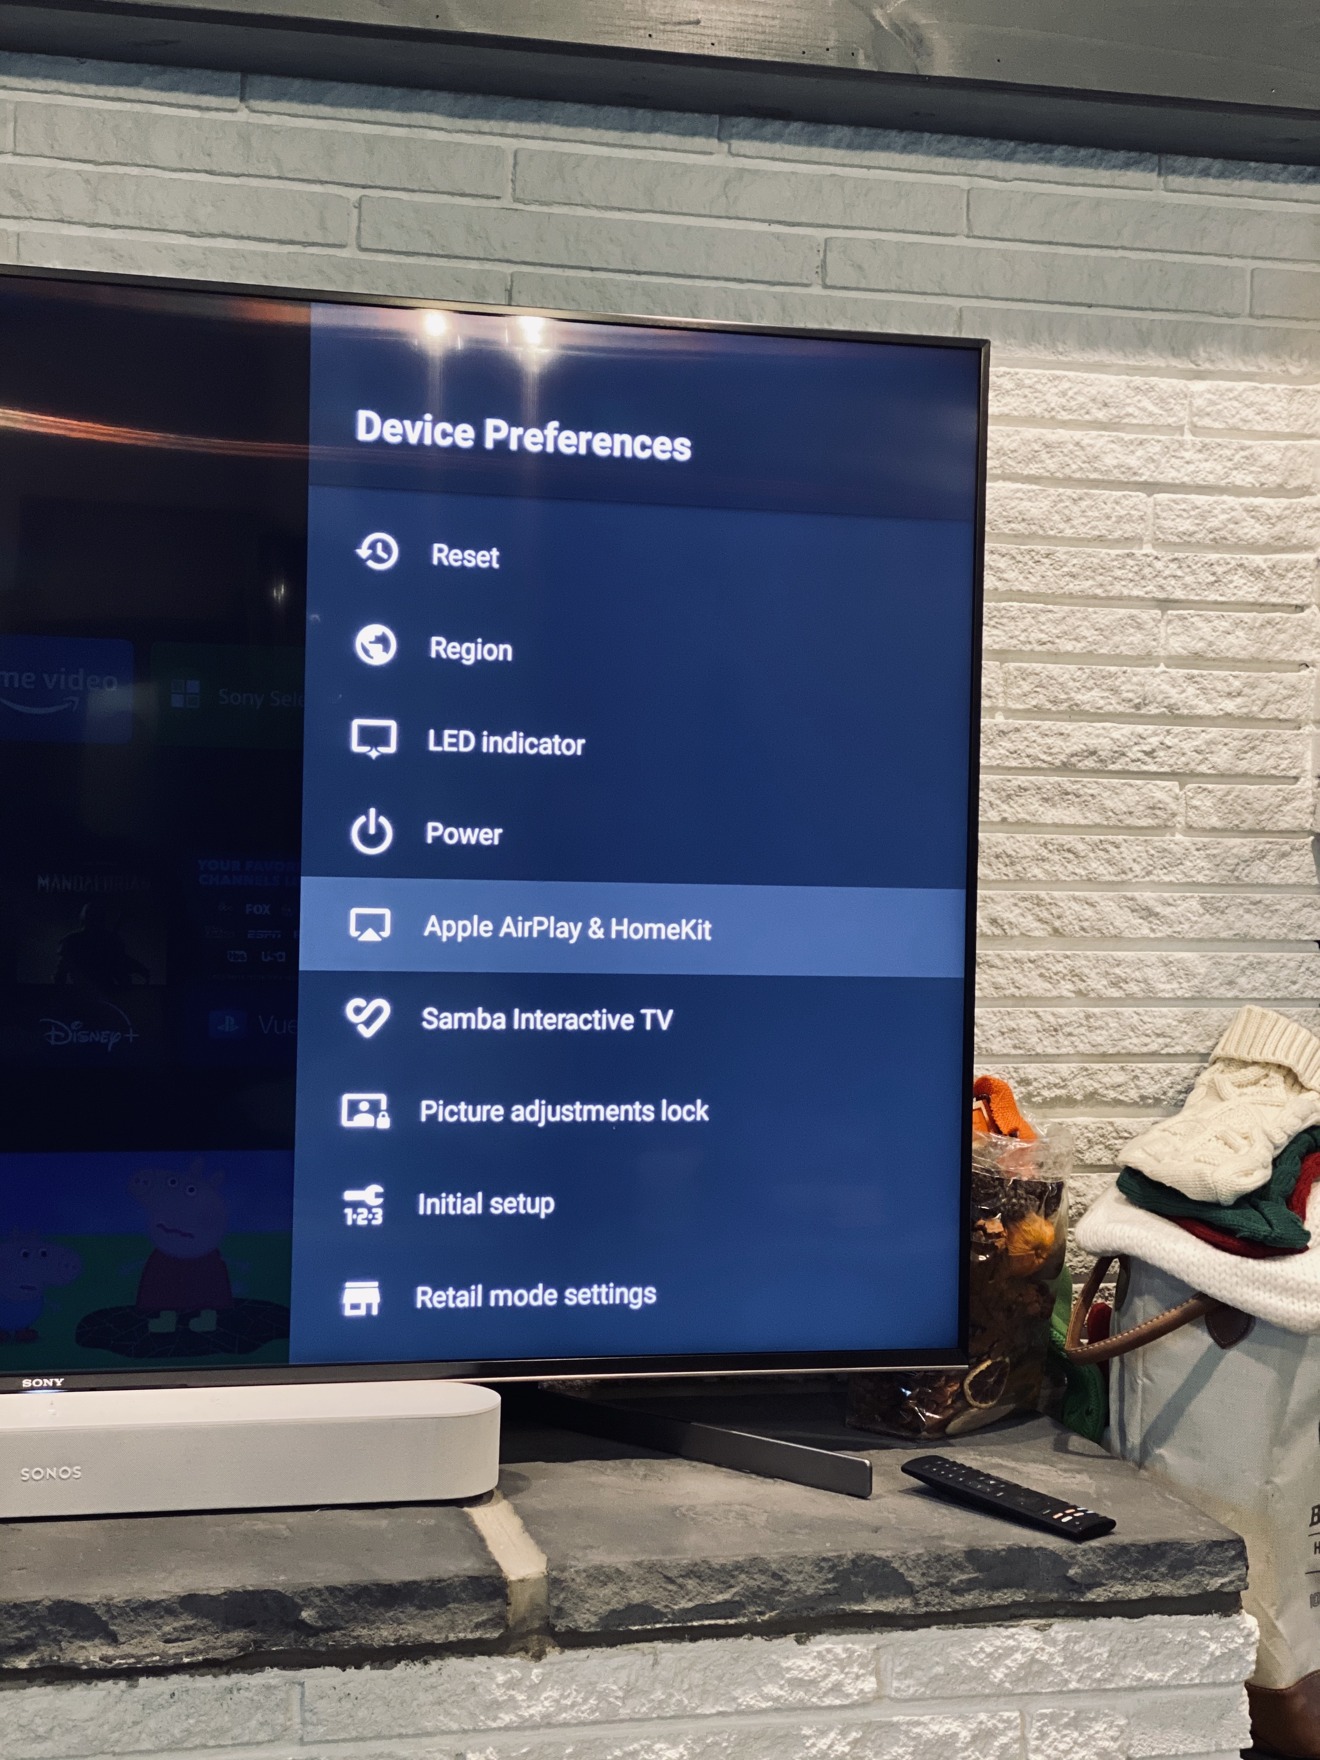 Hot And Airplay 2 On Sony Smart Tvs, Screen Mirroring Iphone To Sony Tv